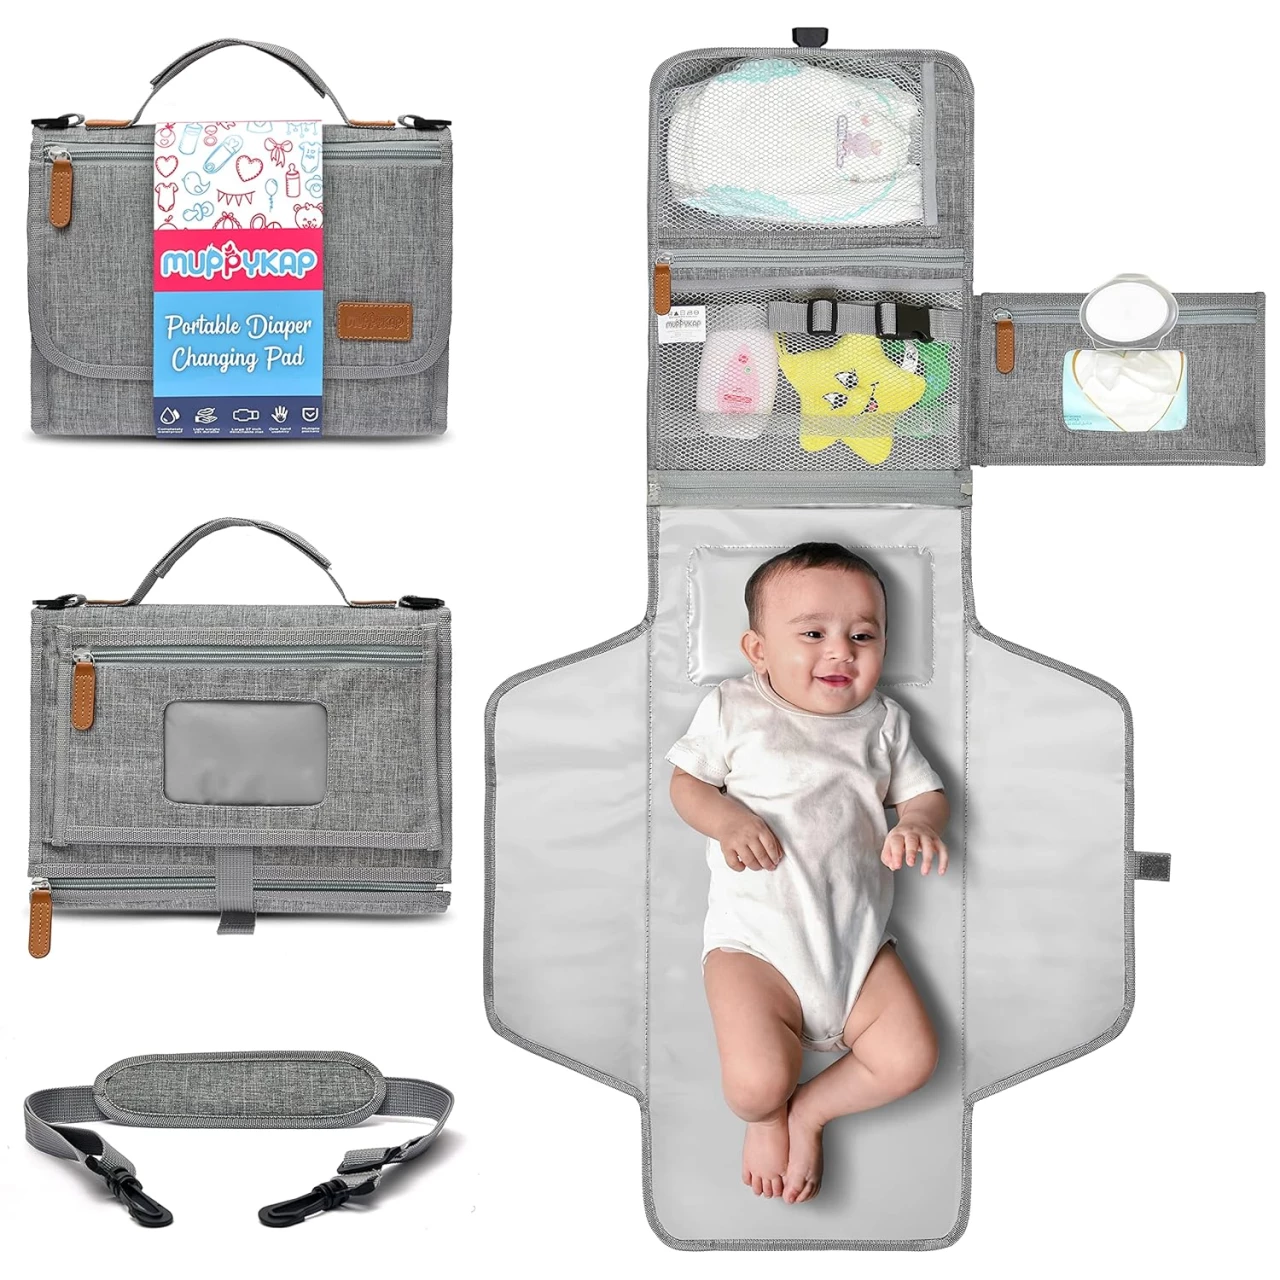 Portable Changing Pad with Shoulder Strap - Detachable Travel Changing Pad - Baby Shower Gifts - Fully Padded &amp; Lightweight - Baby Boy Gifts - Diaper Changing Pad - Changing Mat 27&quot;x22&quot;